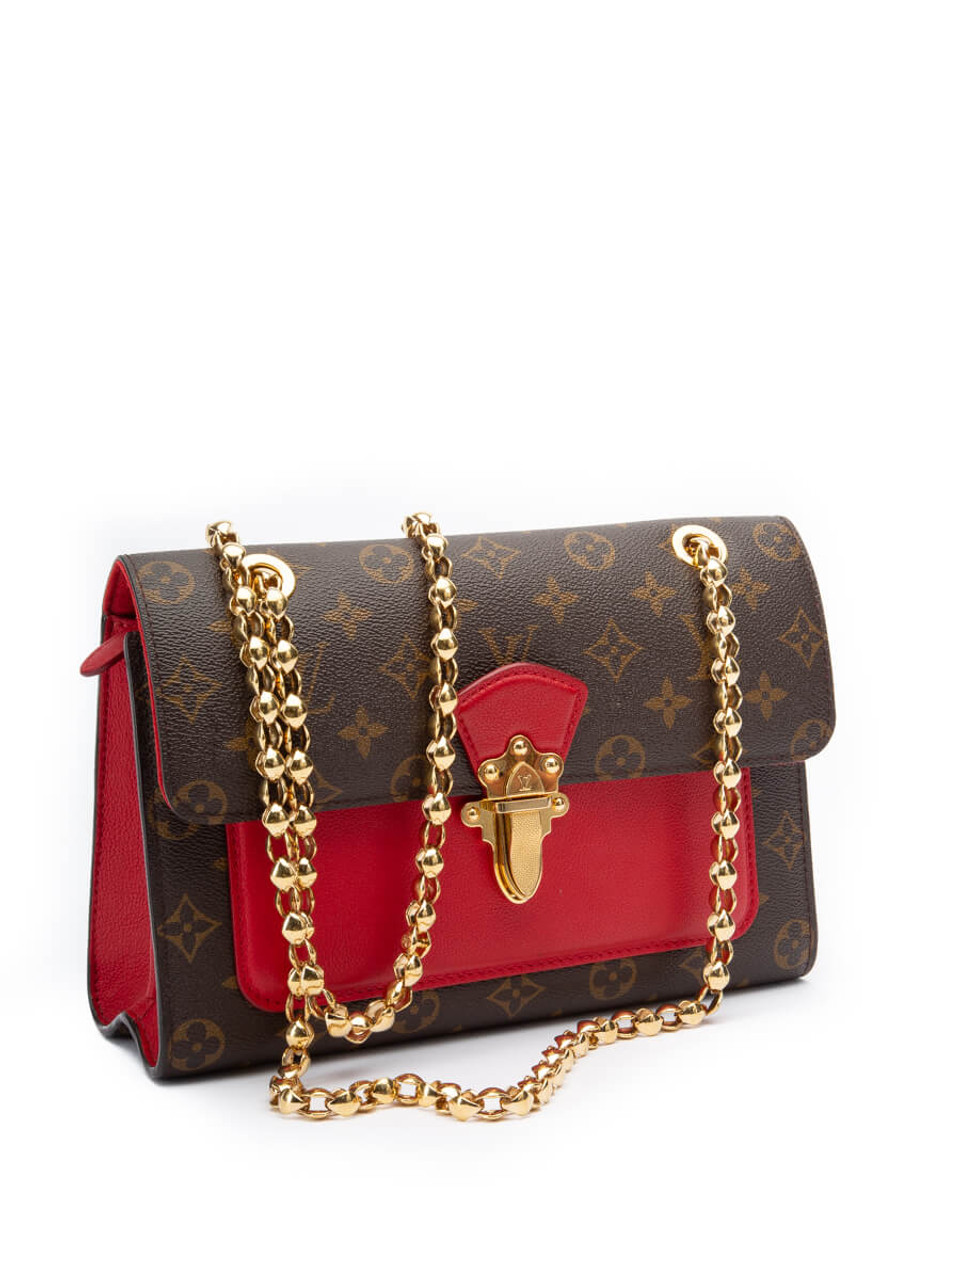 Victoire Monogram Bag Red Leather